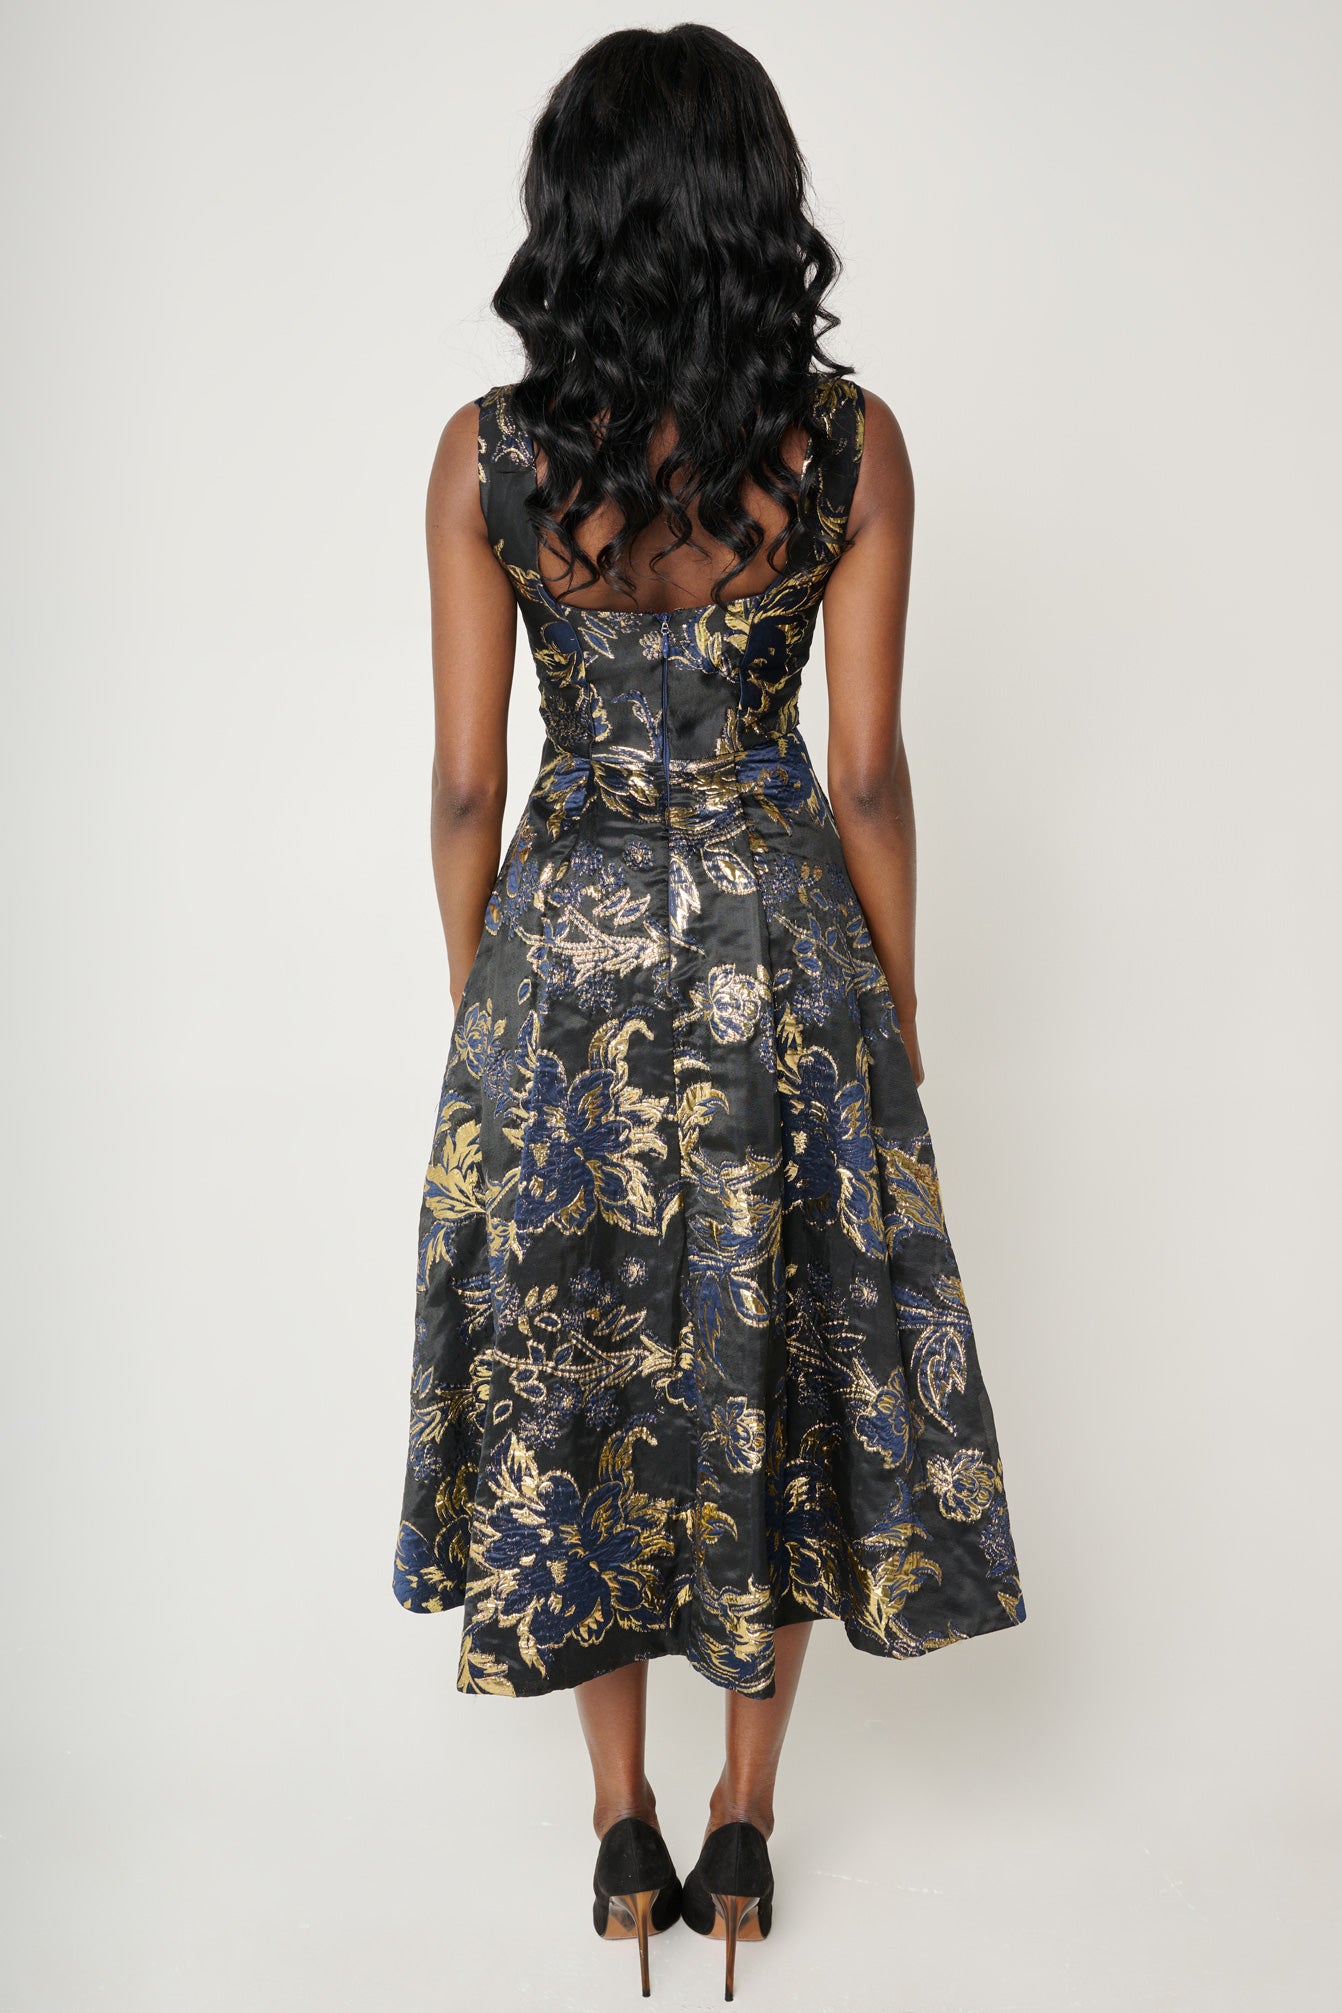 Aspen A-Line Dress by Bariano - RENTAL